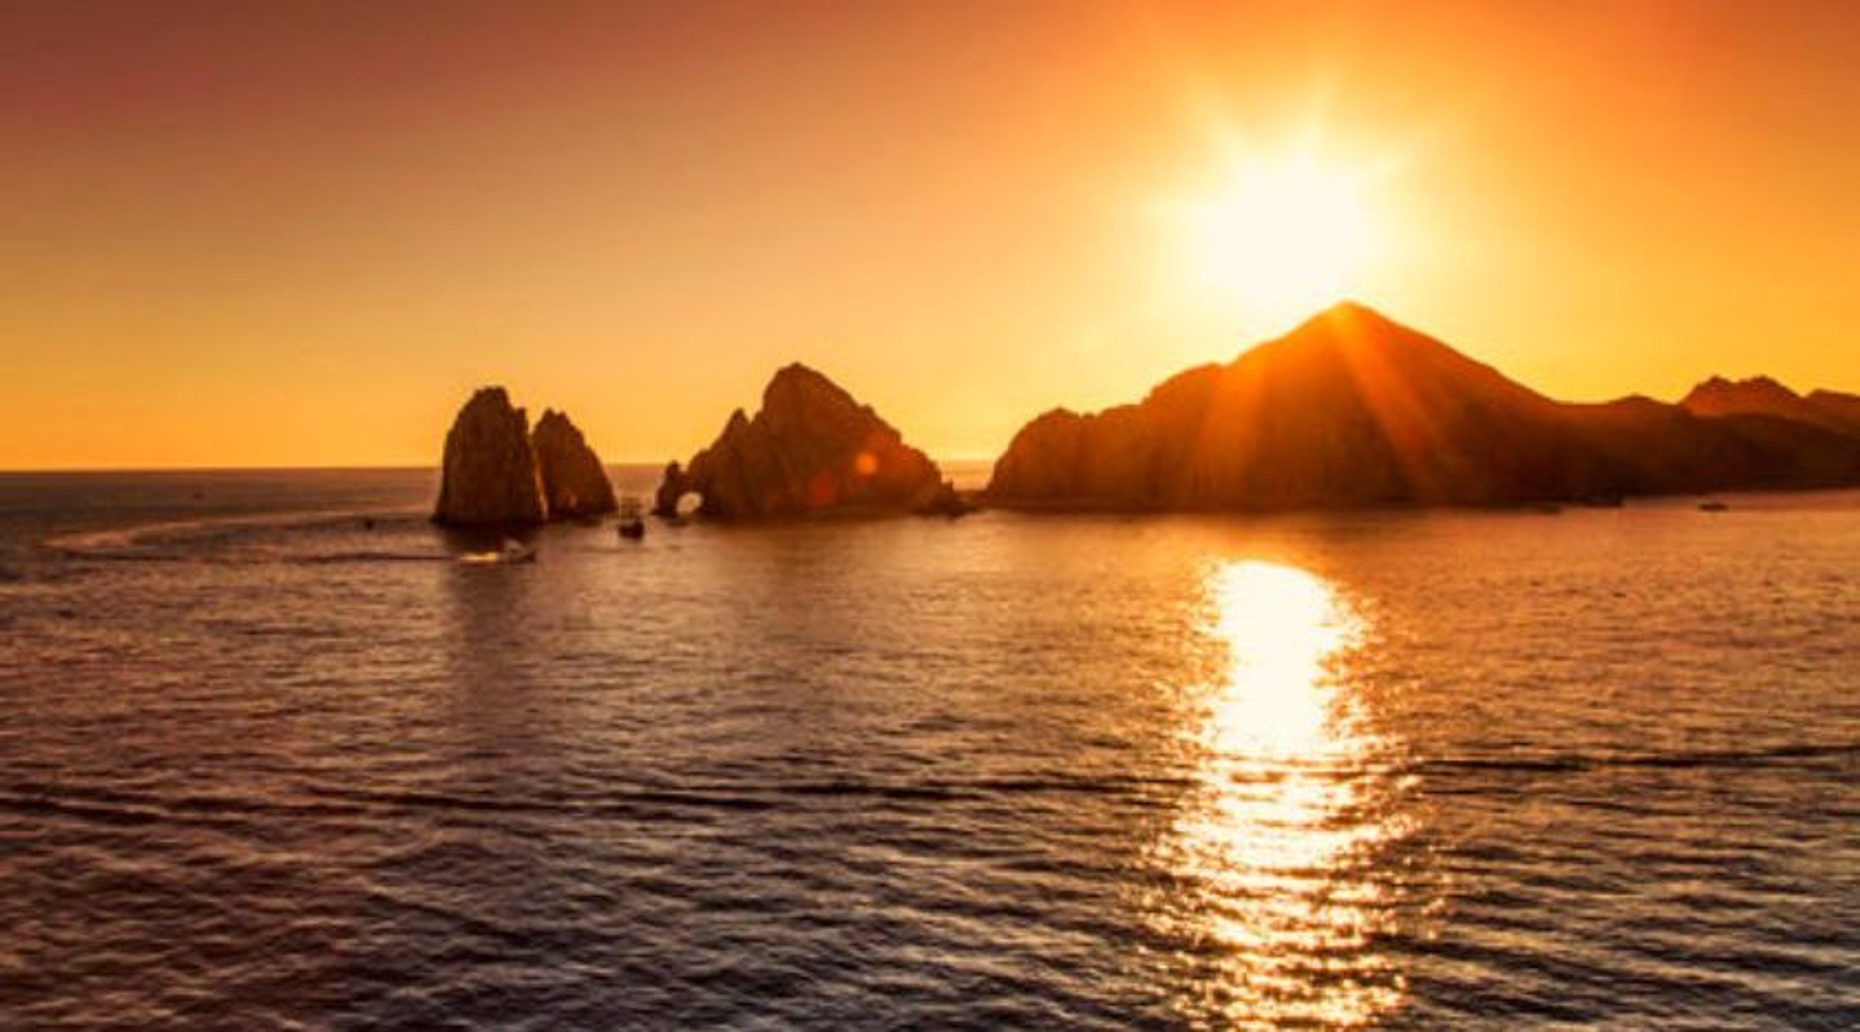 Private Sightseeing & Sunset Rides Boat Tour in Cabo San Lucas